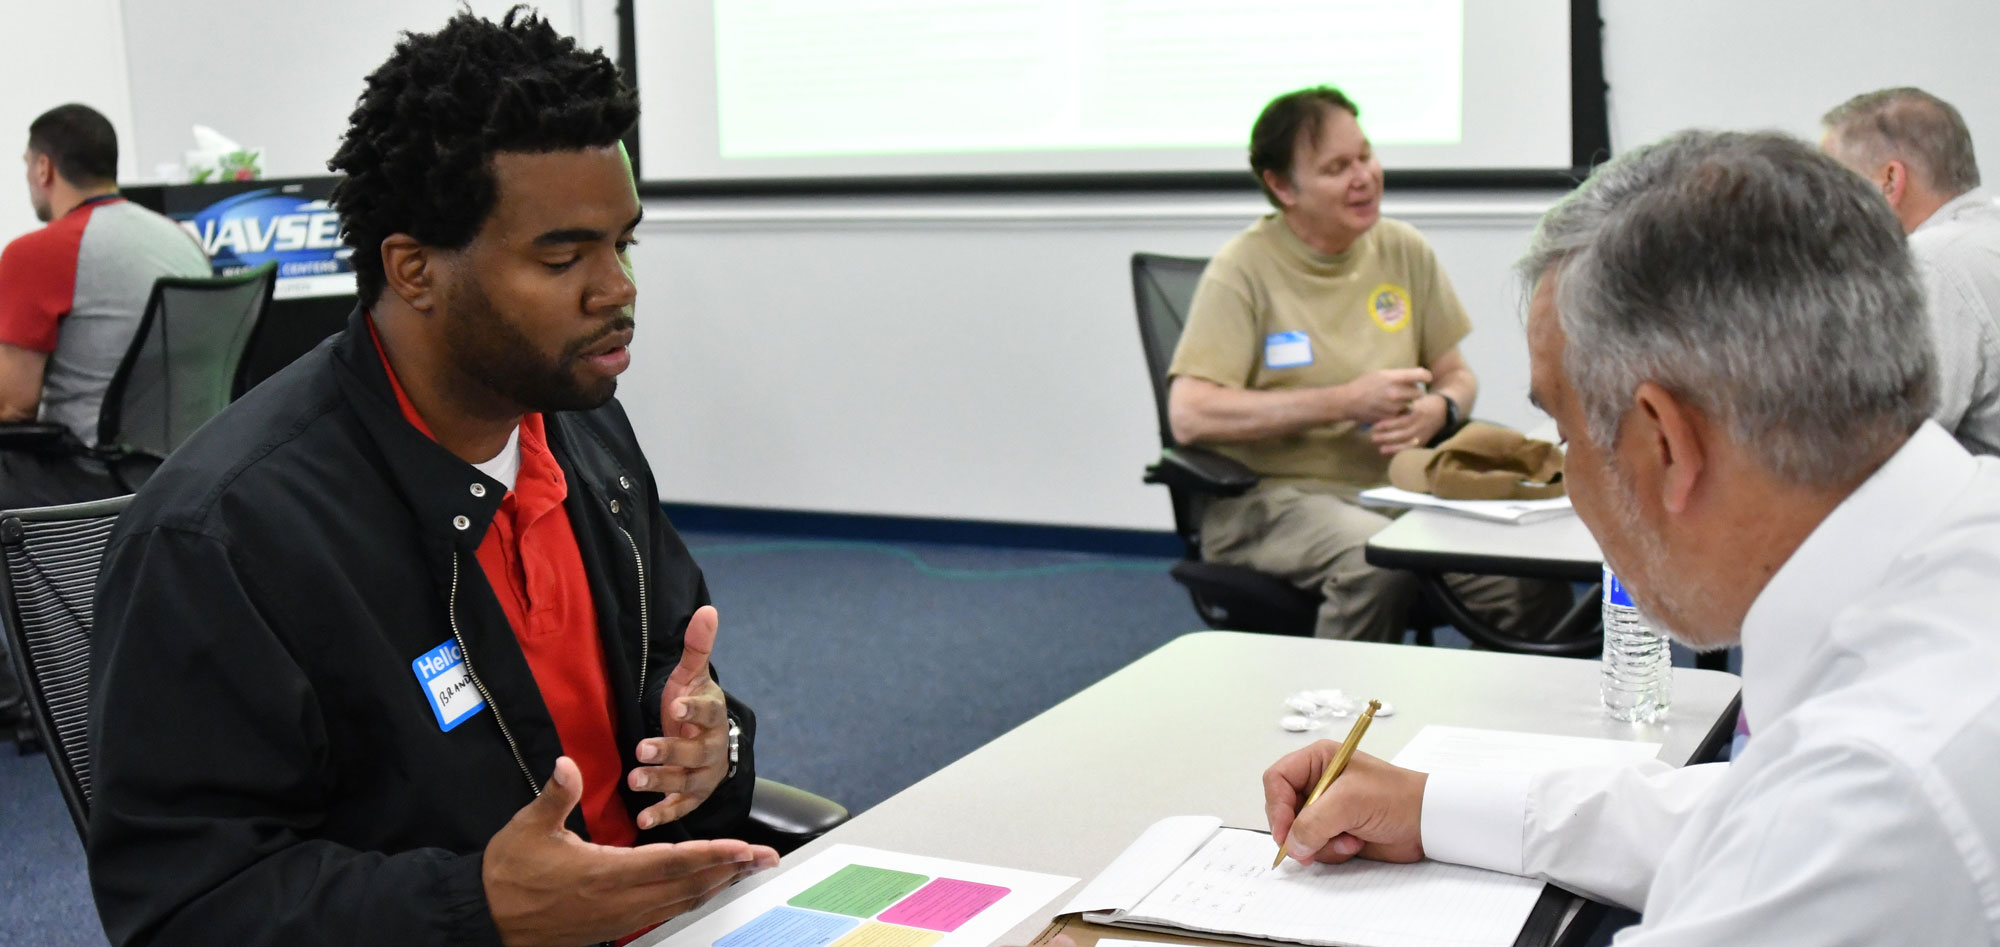 Naval Surface Warfare Center Dahlgren Division’s Veteran Integration Program hosted a veteran speed mentoring event May 15. Eleven mentors and 11 mentees had the opportunity to network and discuss prior service, goals and advice for their careers.